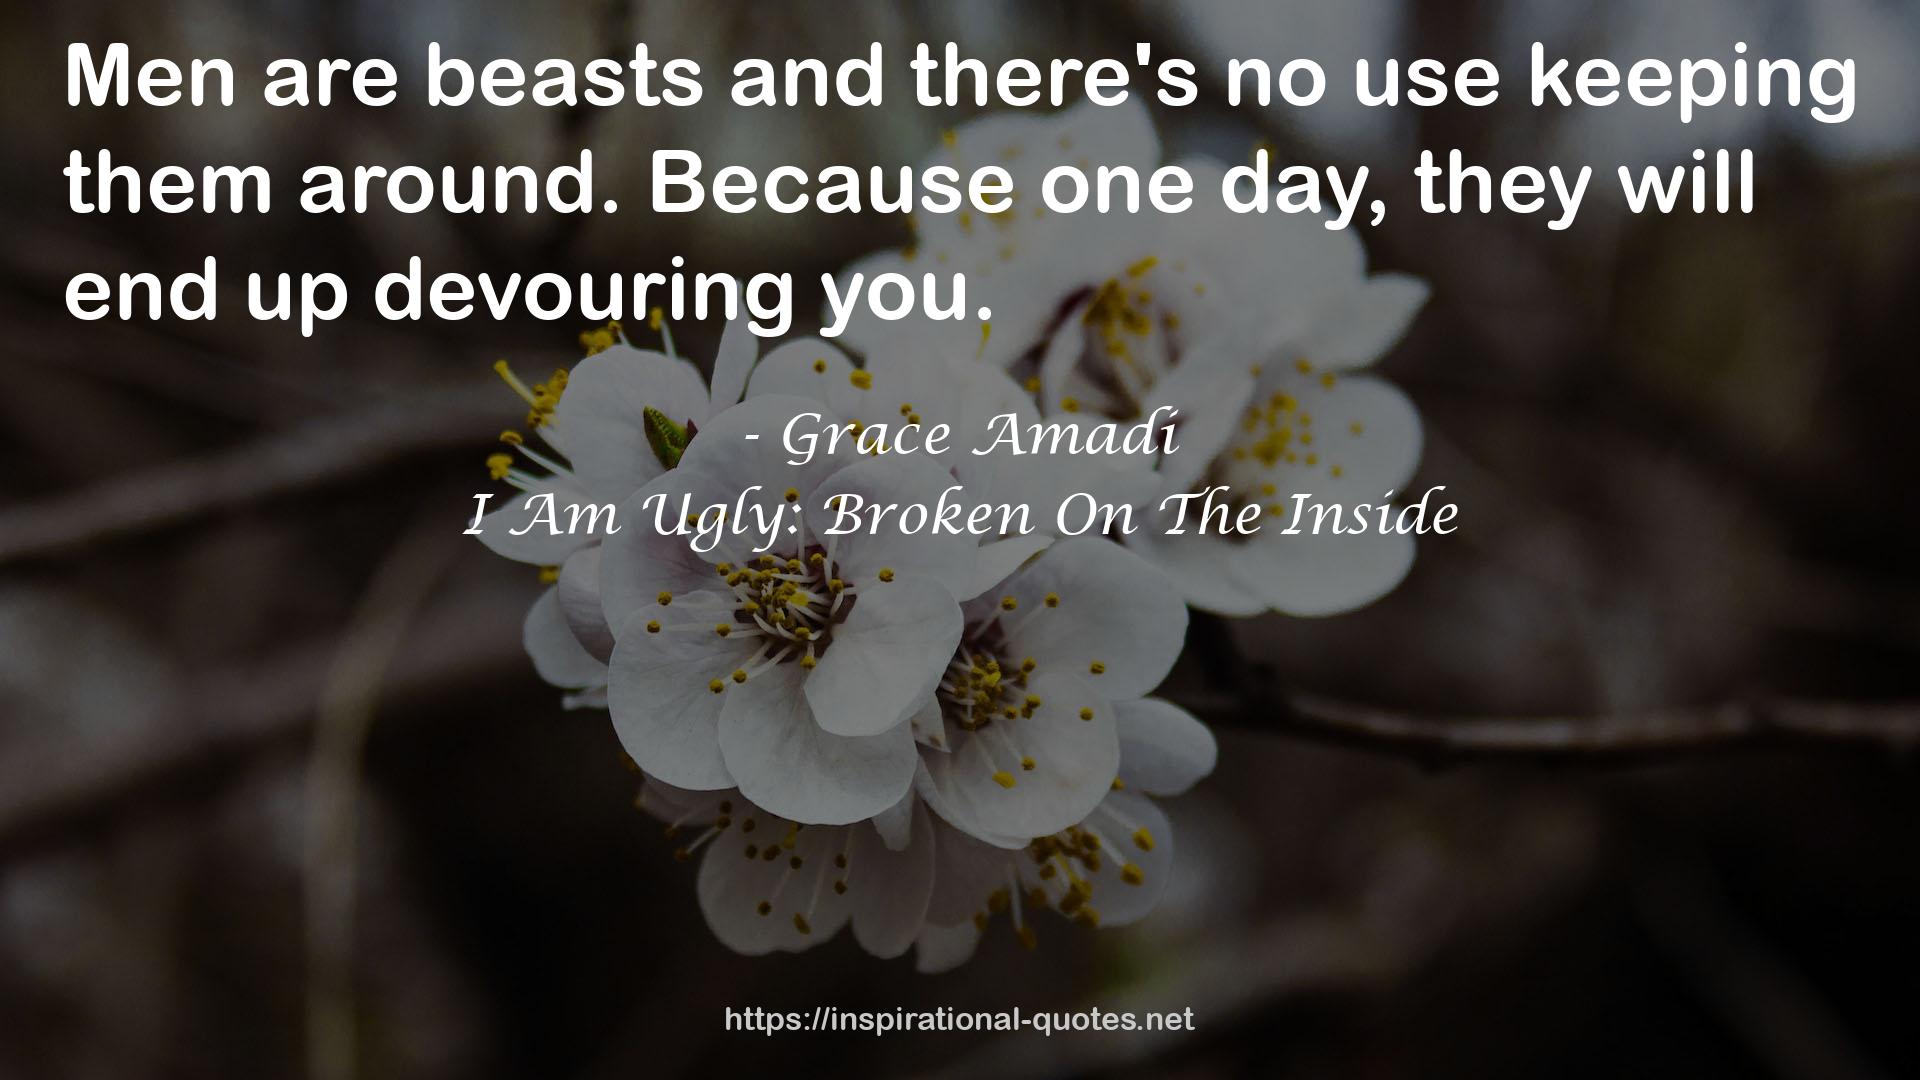 I Am Ugly: Broken On The Inside QUOTES